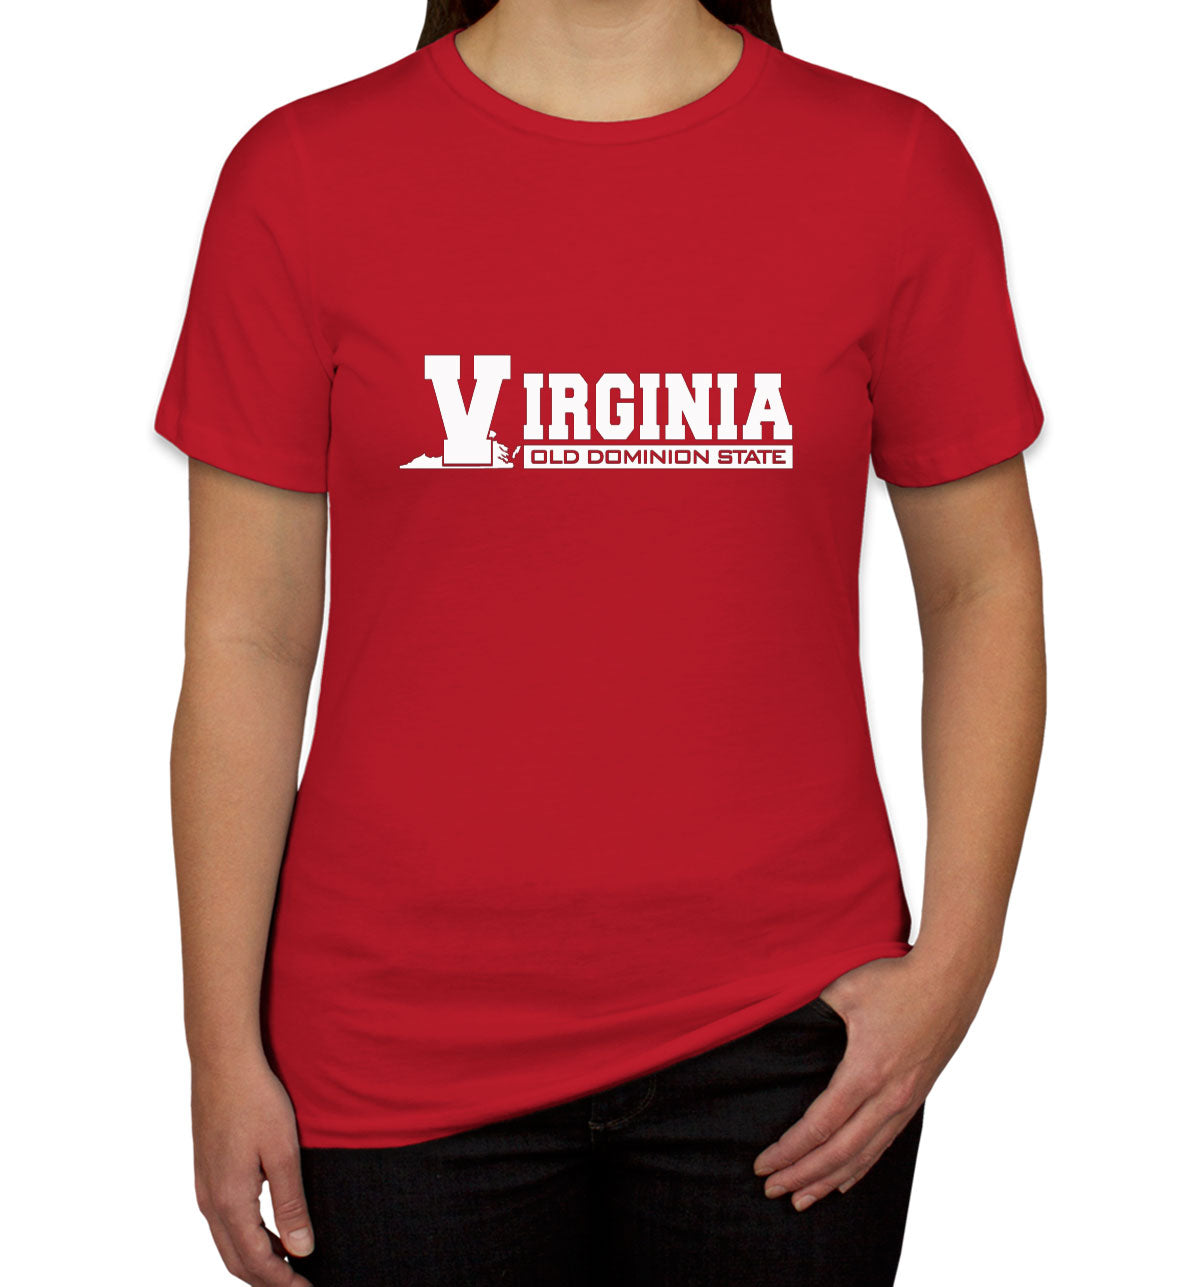 Virginia Old Dominion State Women's T-shirt